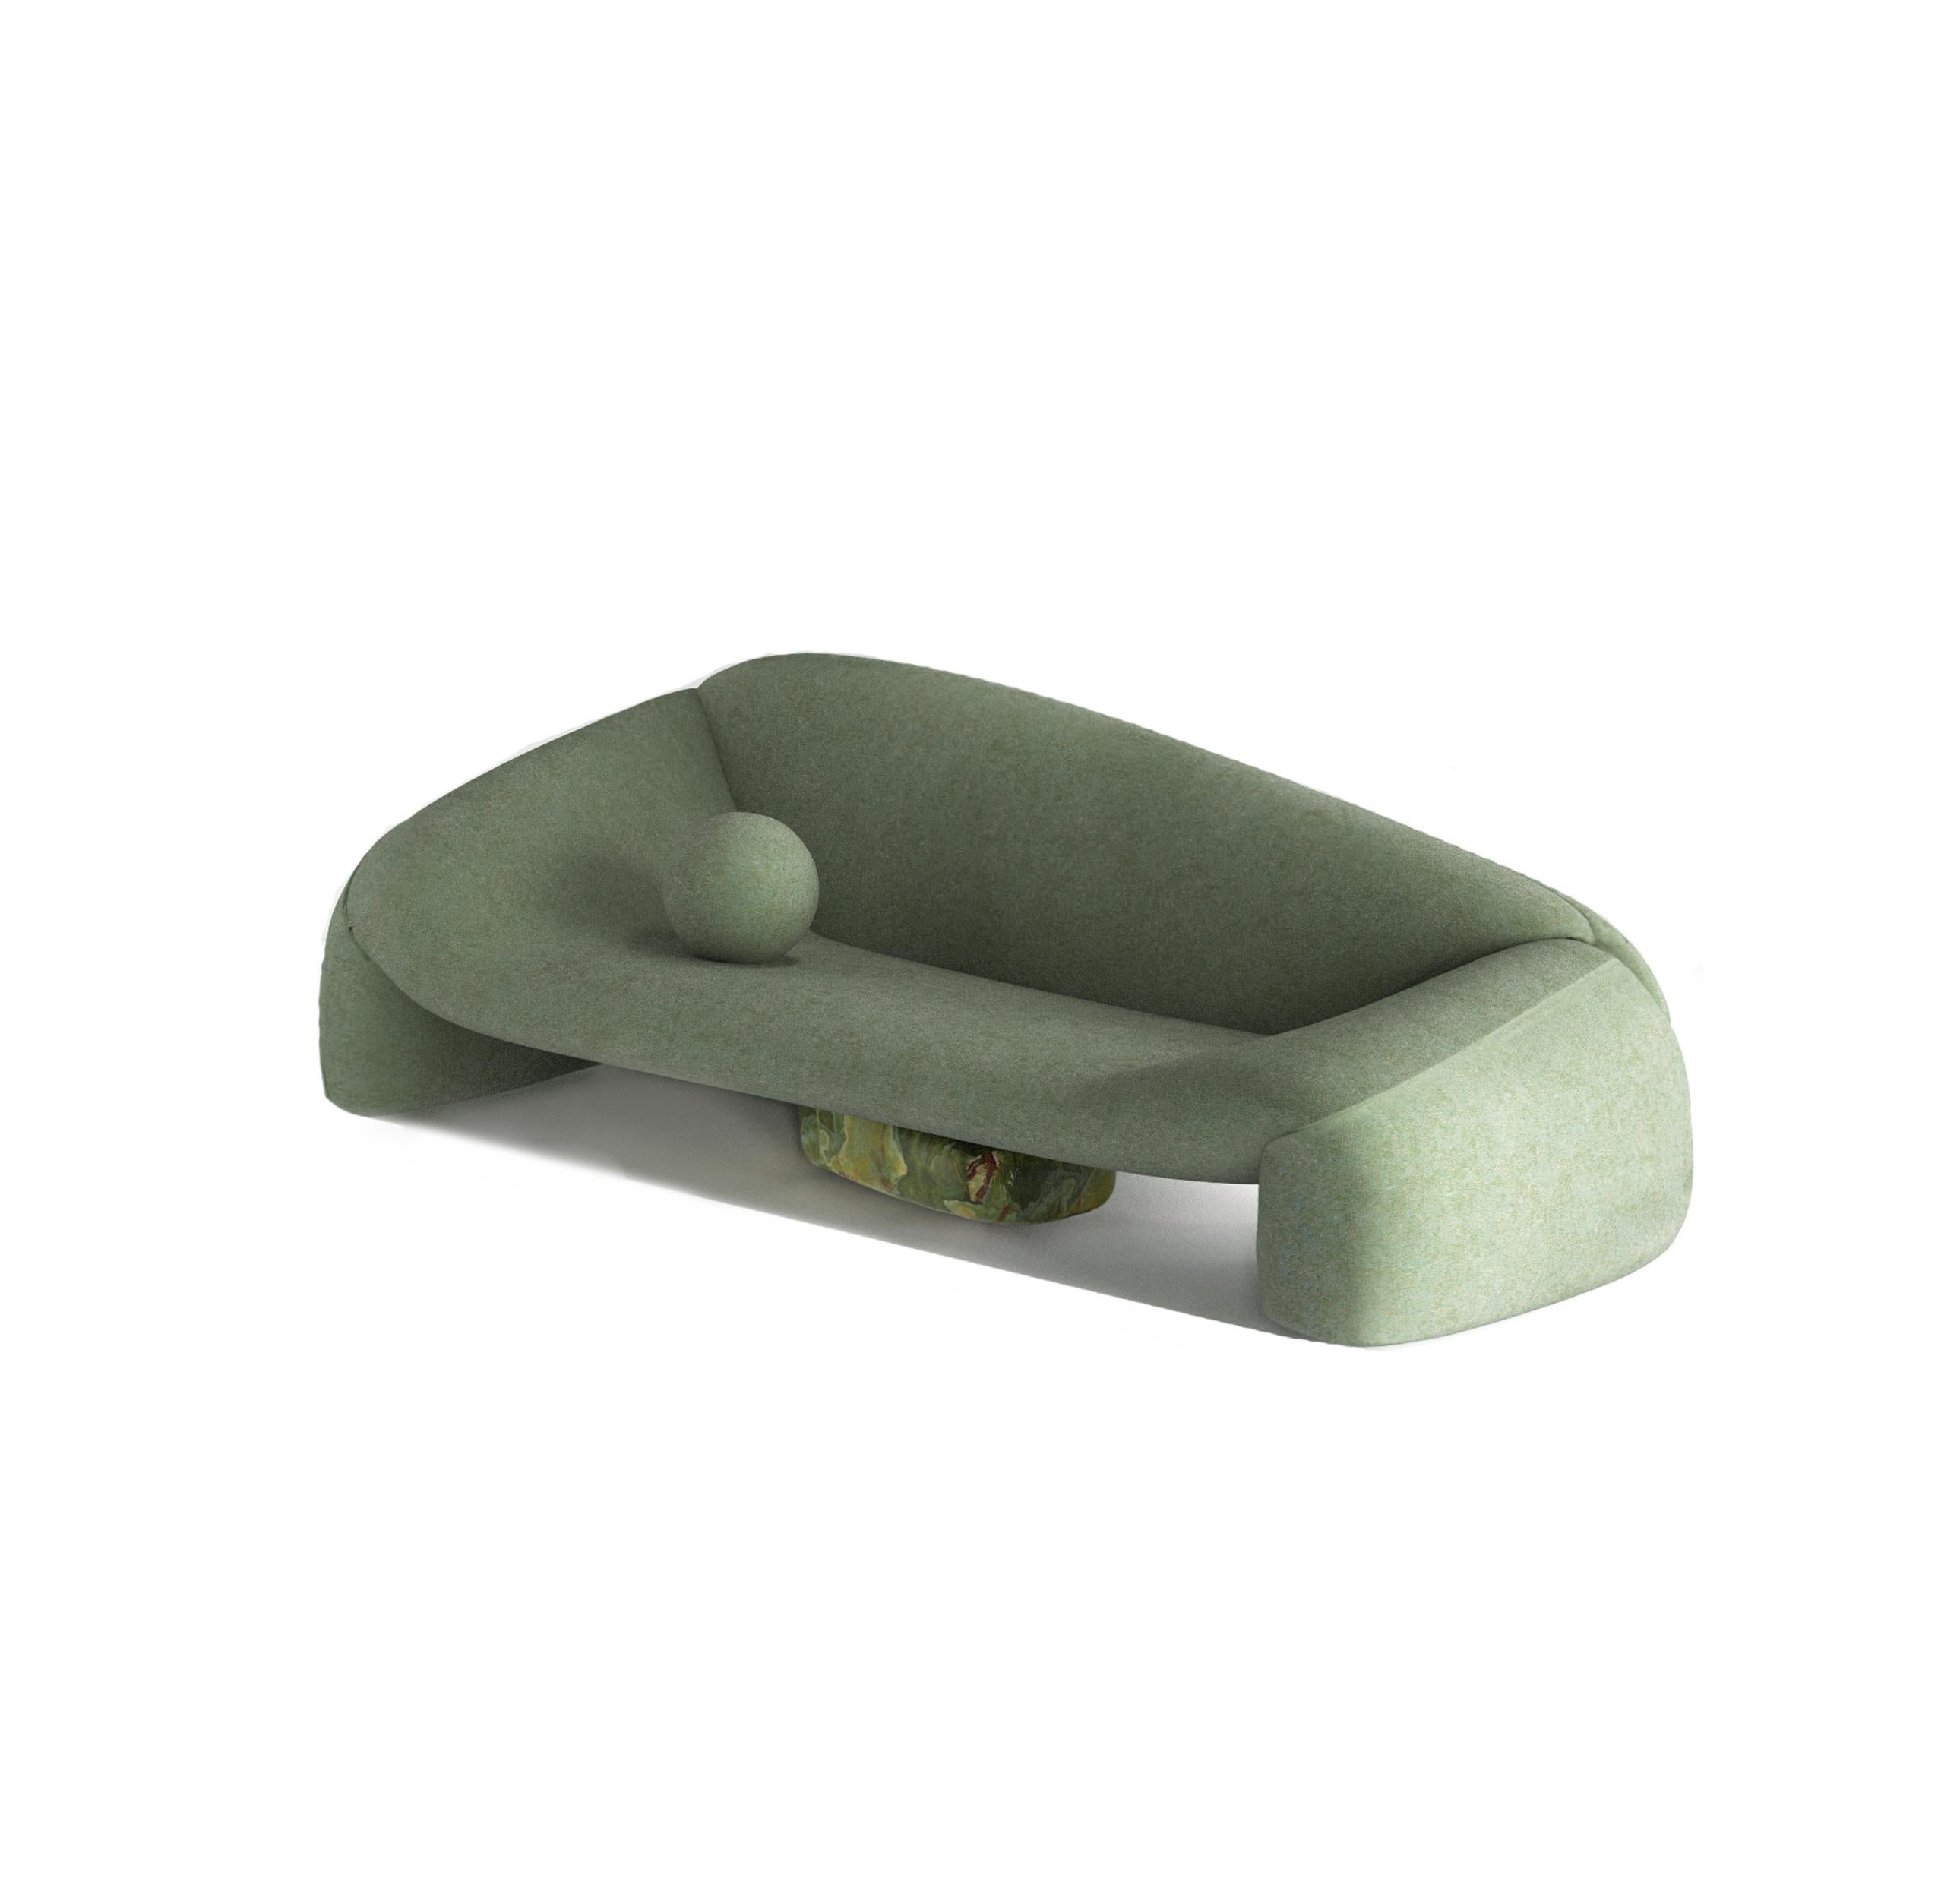 Jell Sofa in Light Green Fabric by Alter Ego Studio


Dimensions
W 260 cm 
D 120 cm
H 85 cm

Product features

Product options:

Upholstery:
Available in all Alter Ego leathers and fabrics.
Available in client’s own Material.